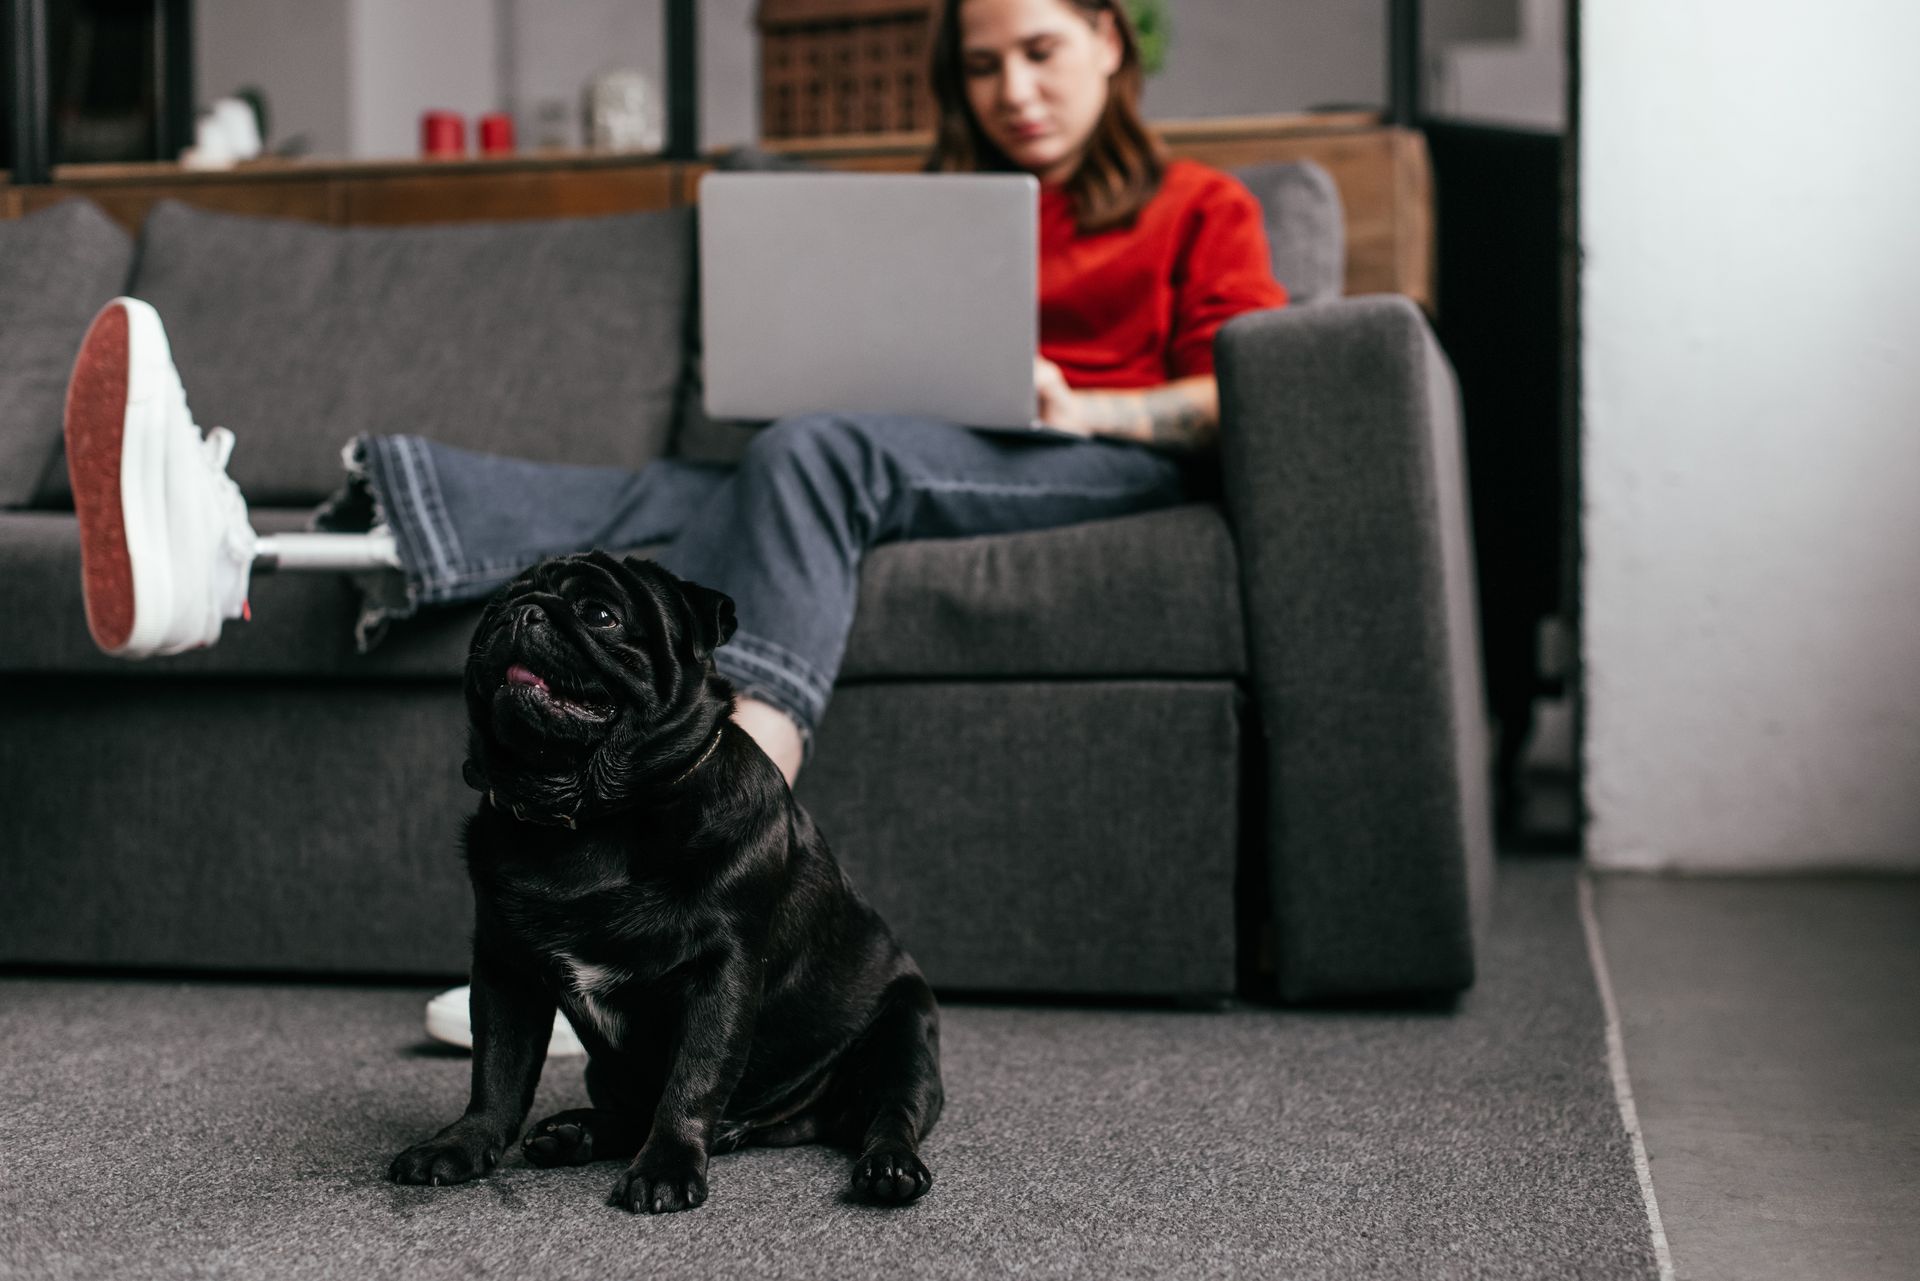 A young woman with a prosthetic leg relaxes into a comfortable sofa as she works on her laptop, accompanied by her small pug who sits by her feet.